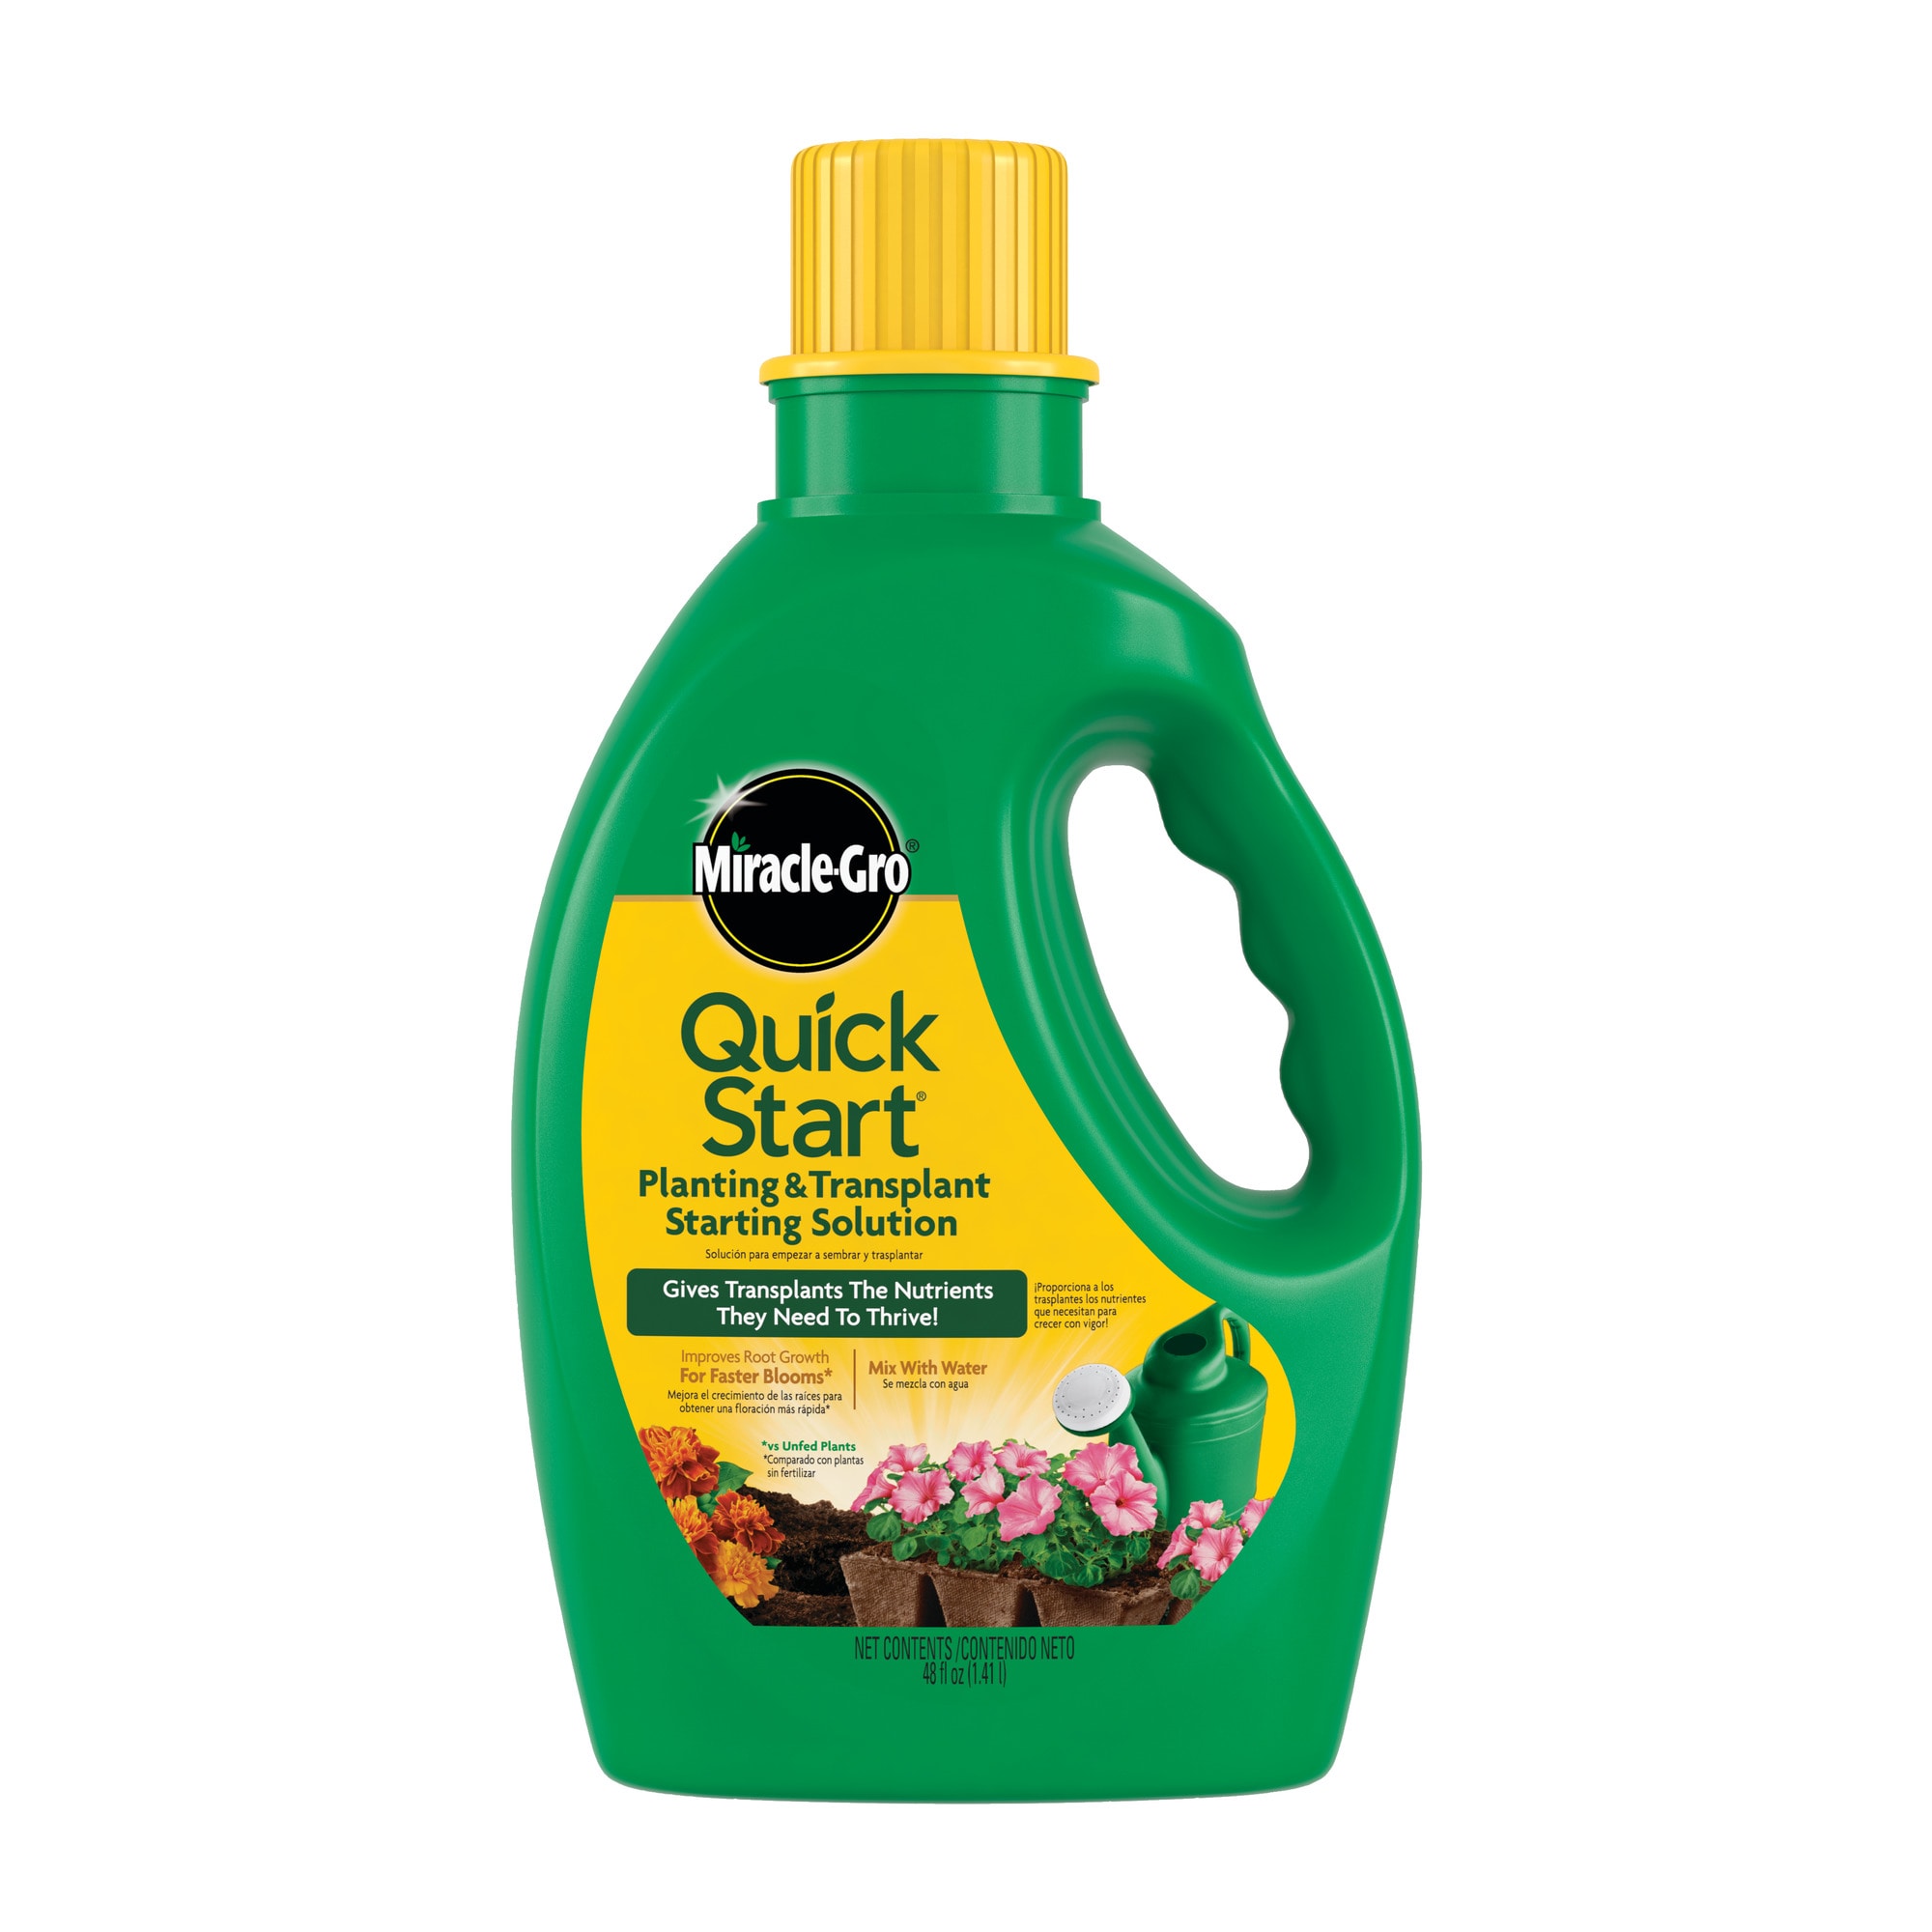 Miracle-Gro Quick Start Planting and Transplant Solution 48-fl oz